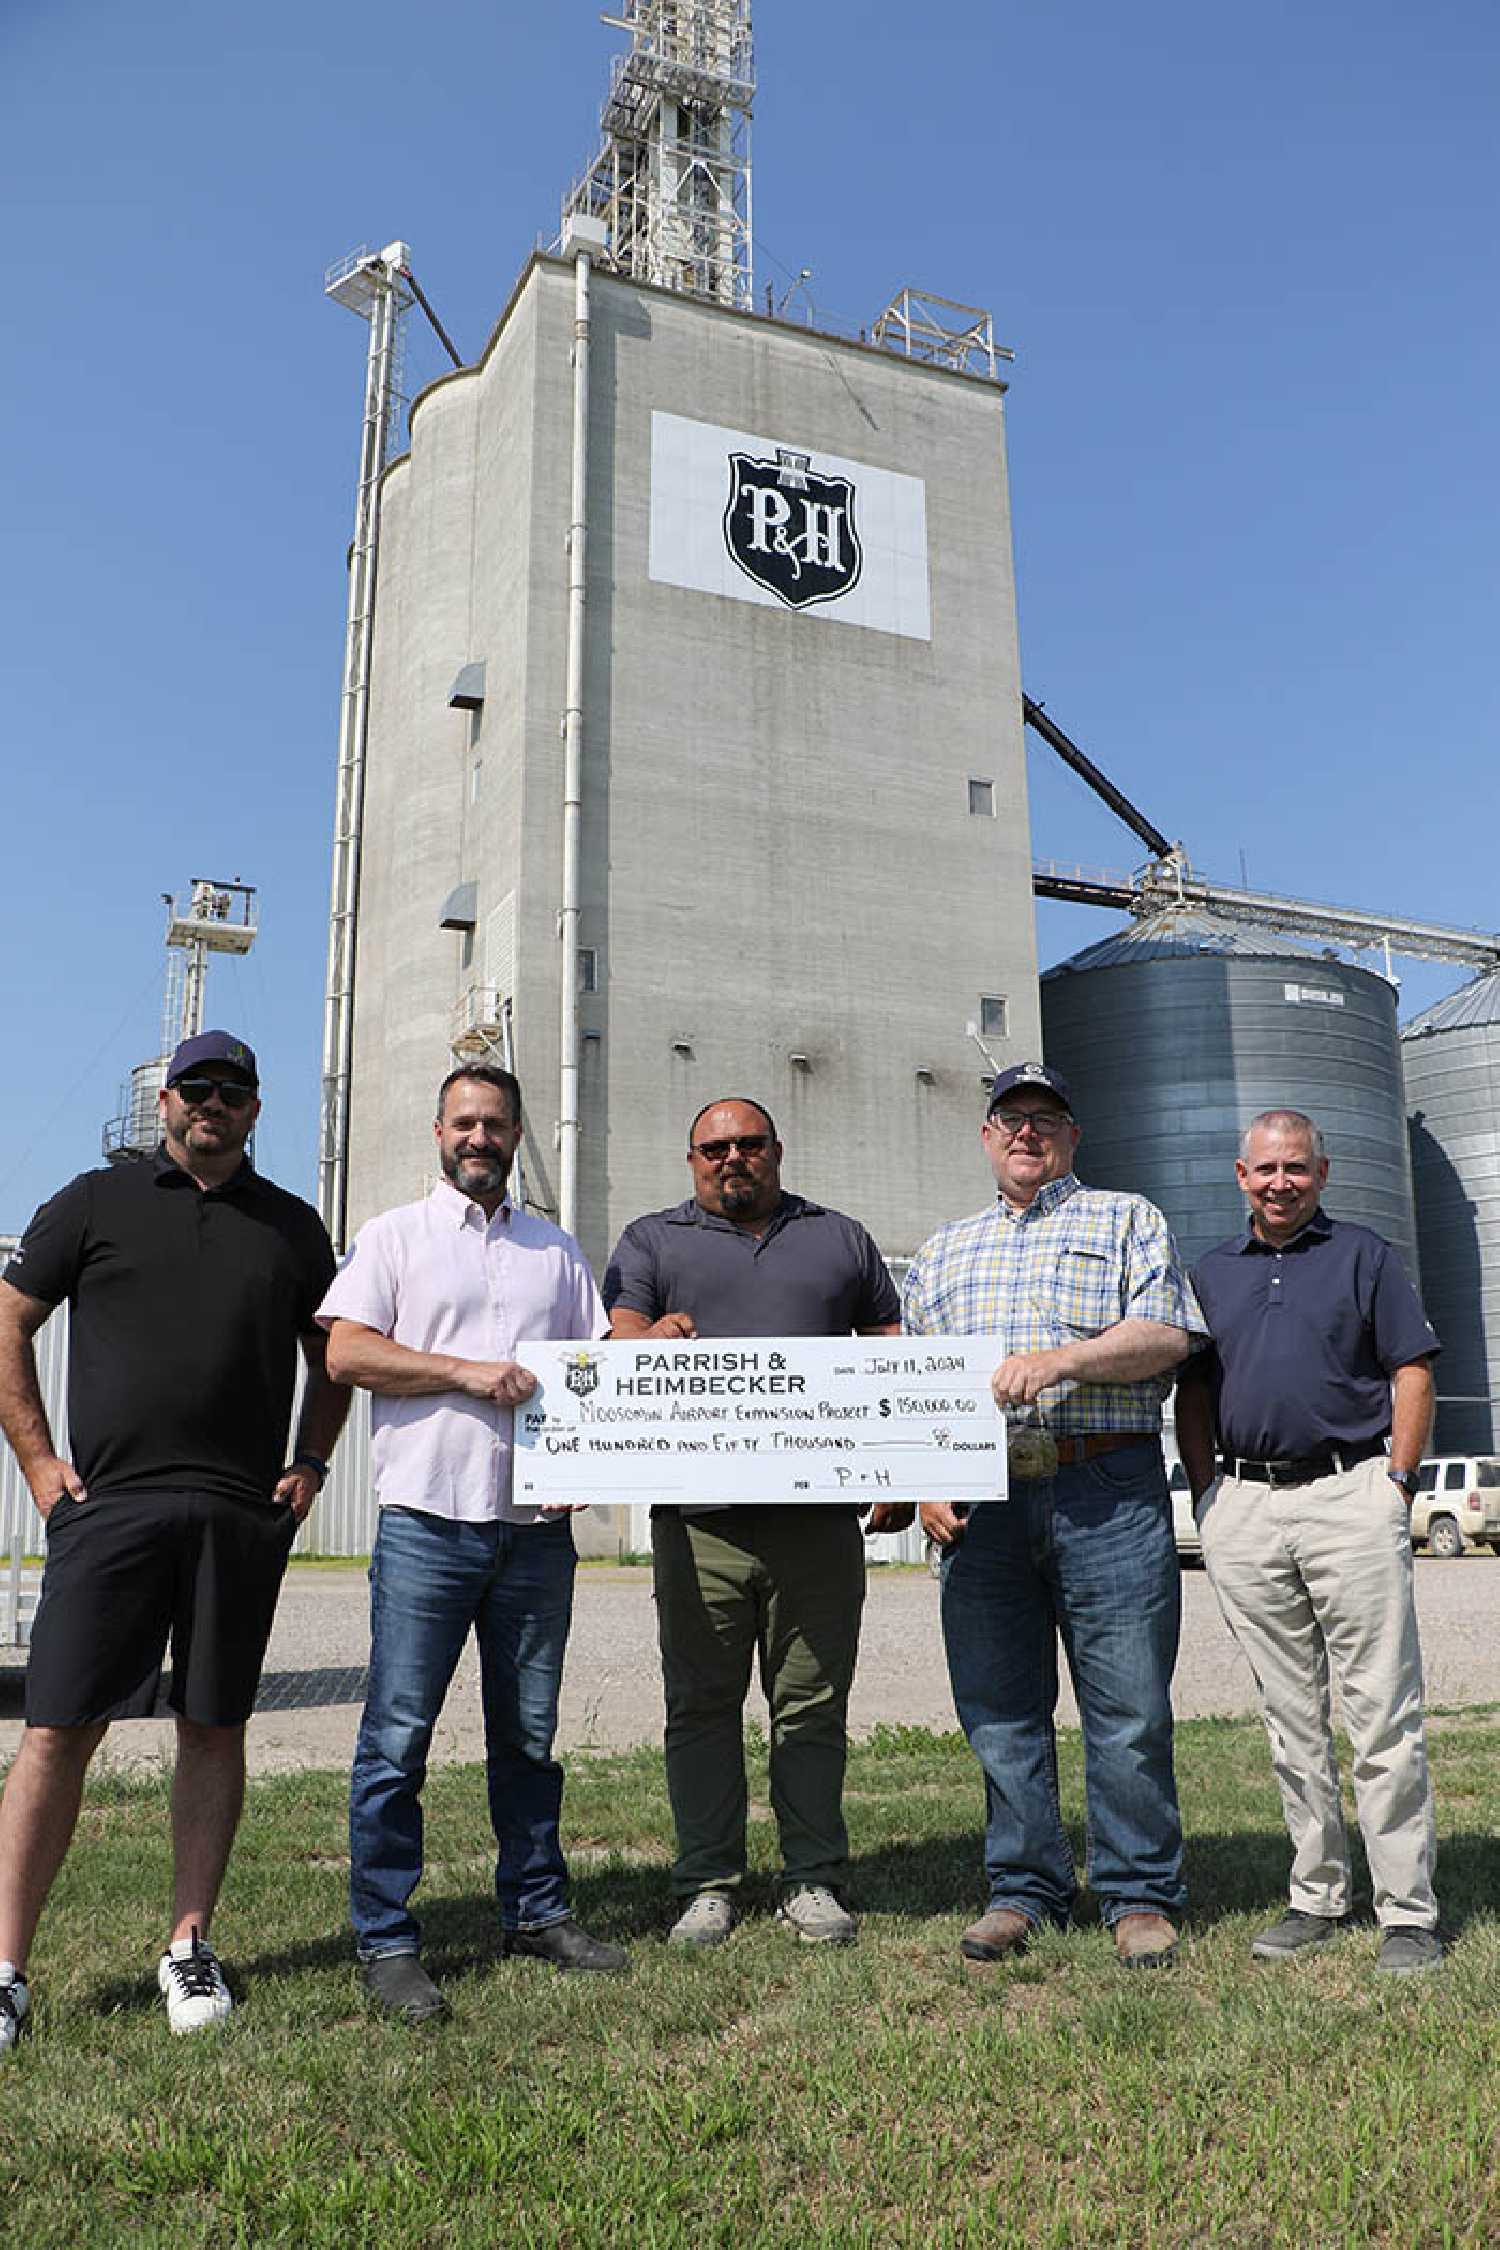 Parrish and Heimbecker donated $150,000 last week to the Moosomin Airport Expansion project. From left, Kristjan Hebert of the Community Builders Alliance (CBA), Justin Watson, Senior VP of Grain Origination and Crop Inputs, Cory Woywoda, General Manager at Moosomin P&H, RM of Moosomin Reeve Dave Moffatt, and Tyler Thorn of the CBA.